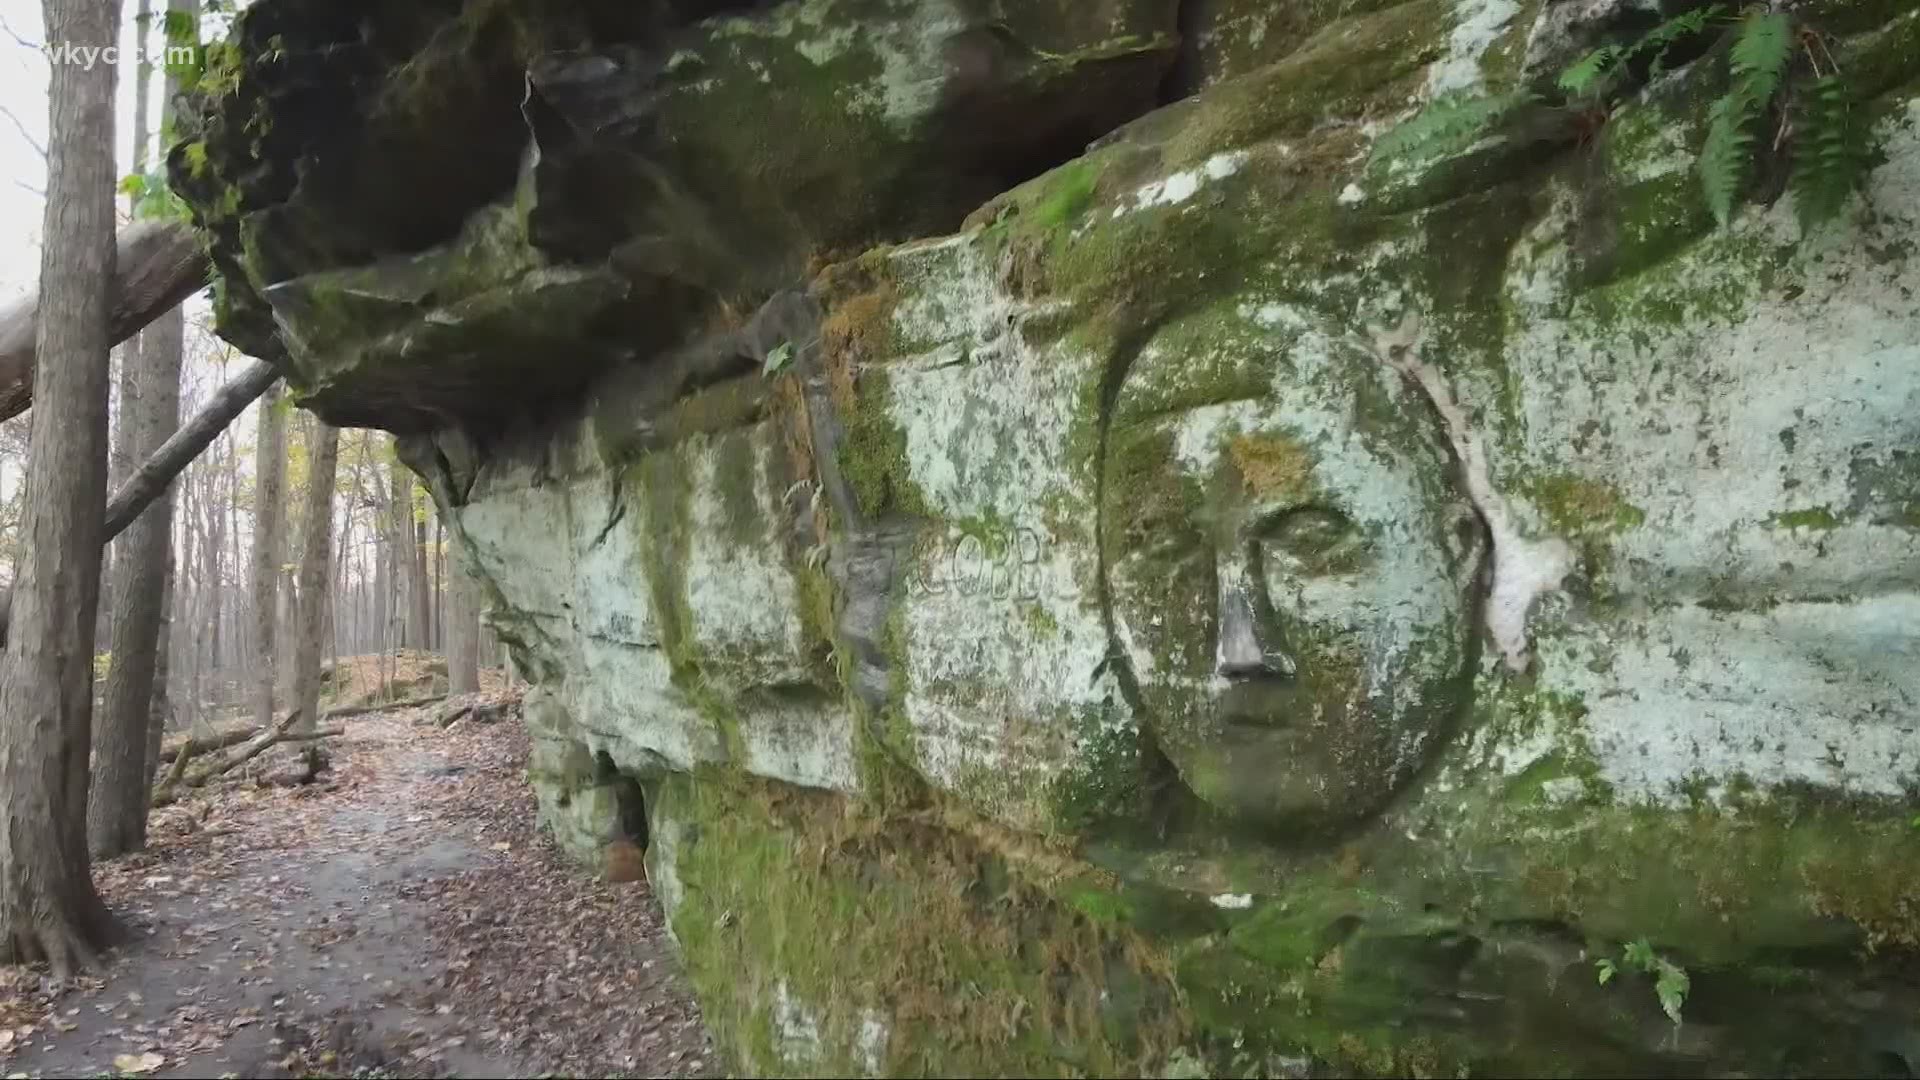 Nov. 6, 2020: We explore the historic carvings at Worden's Ledges in Hinckley.